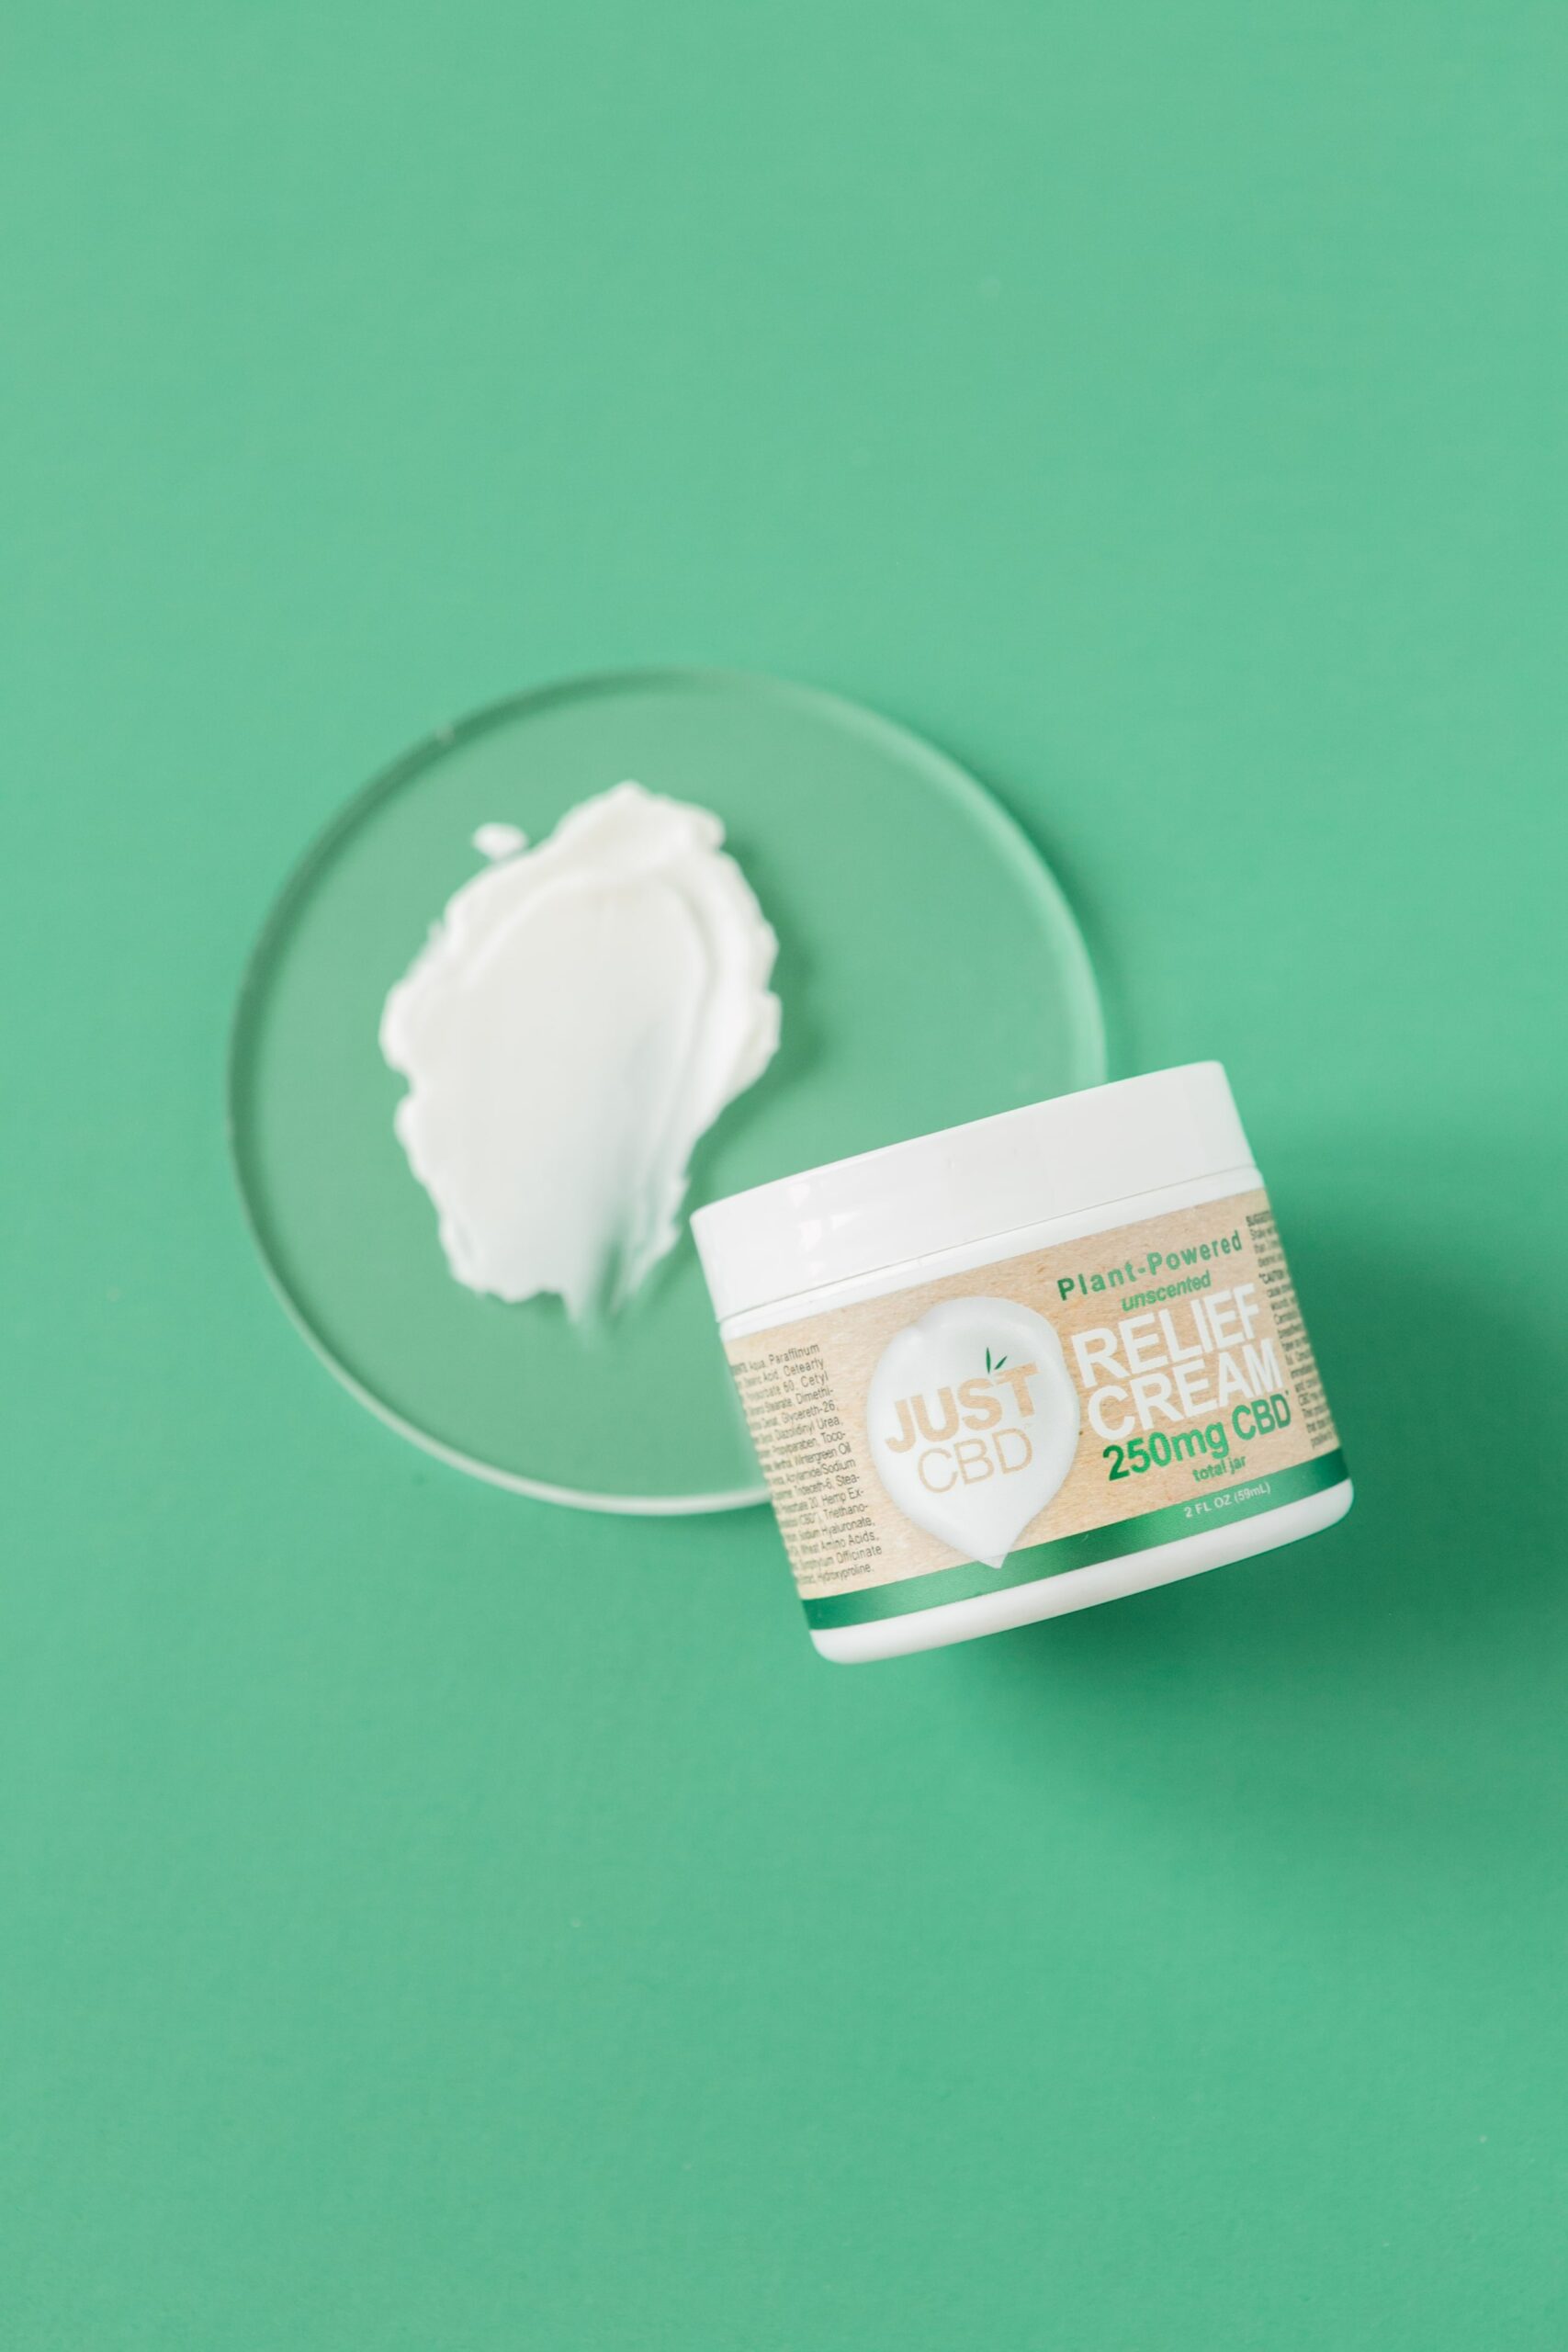 WHAT'S THE BEST CBD TOPICAL?